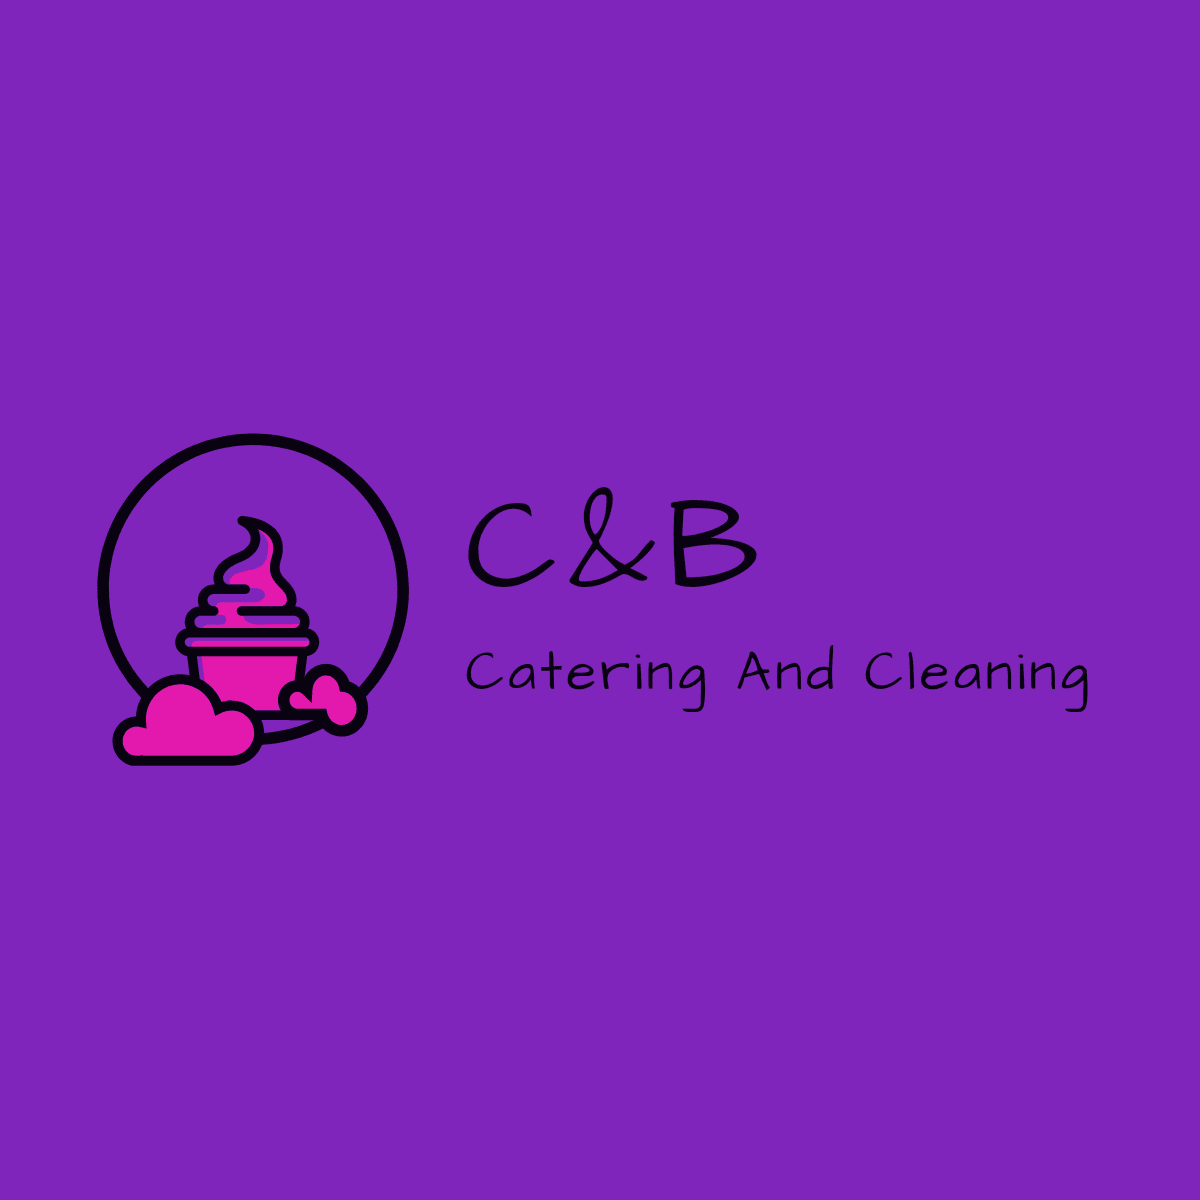 C&B Catering & Cleaning Services